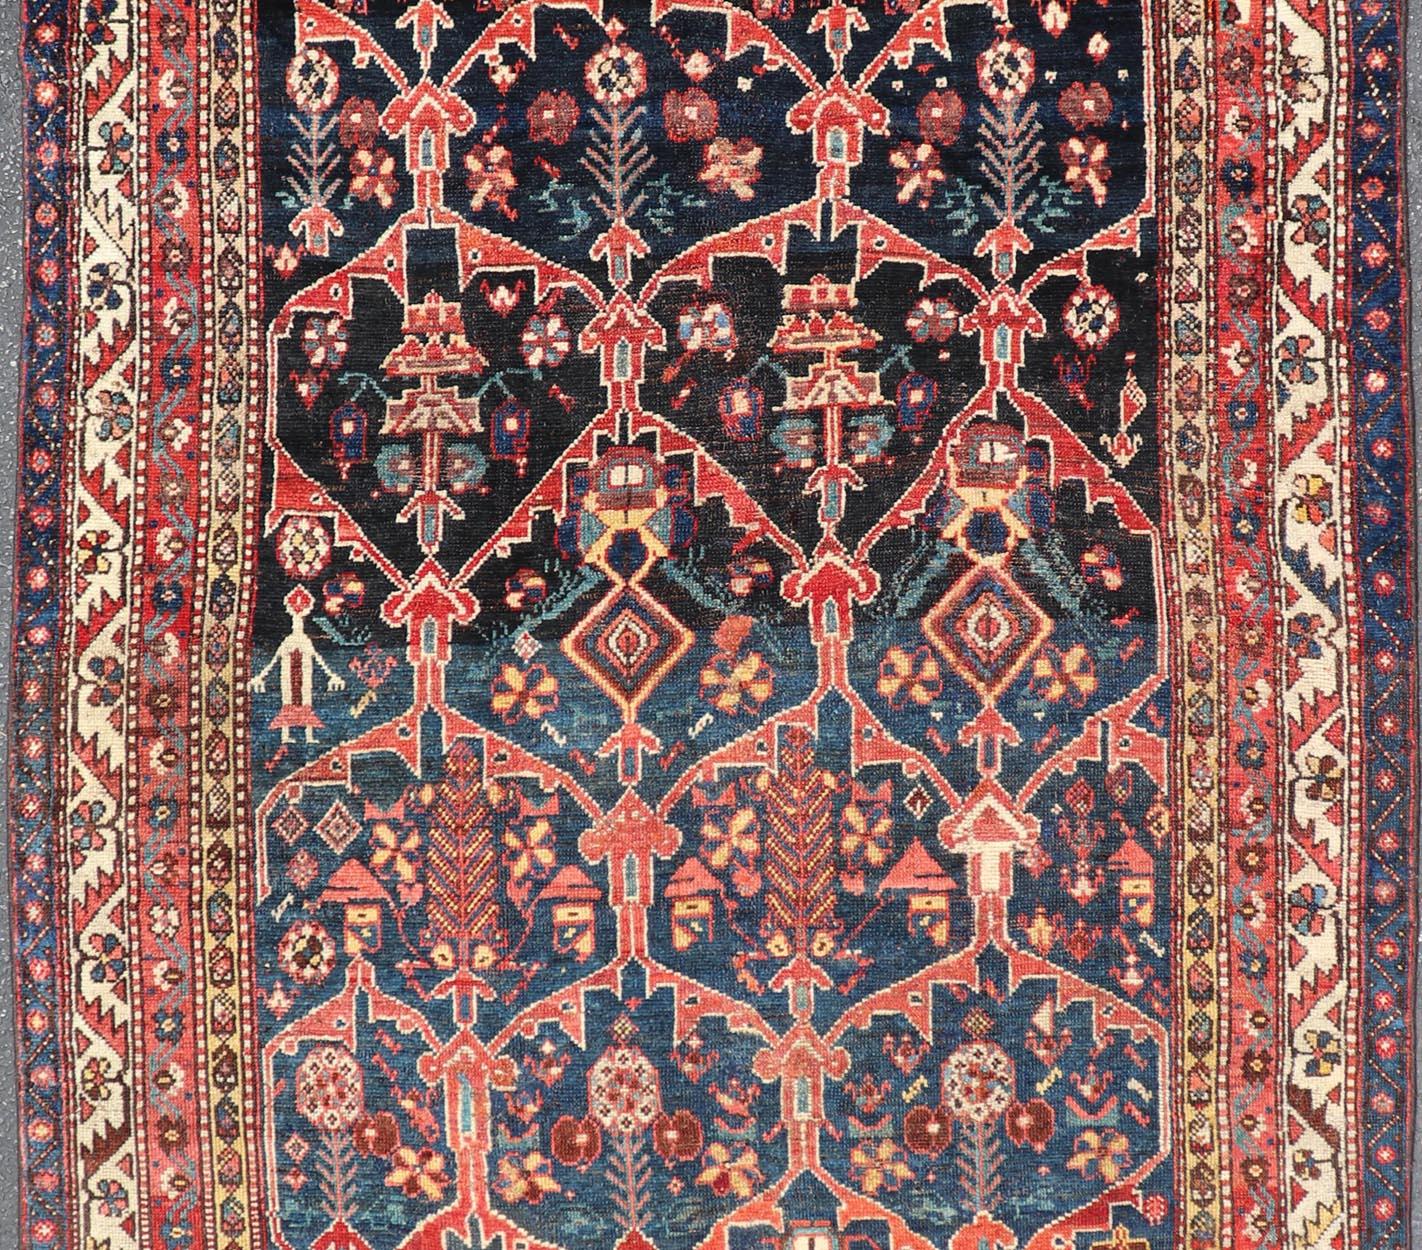 Antique Persian Bakhitari Colorful Rug with All-Over Floral Medallion Design  For Sale 1